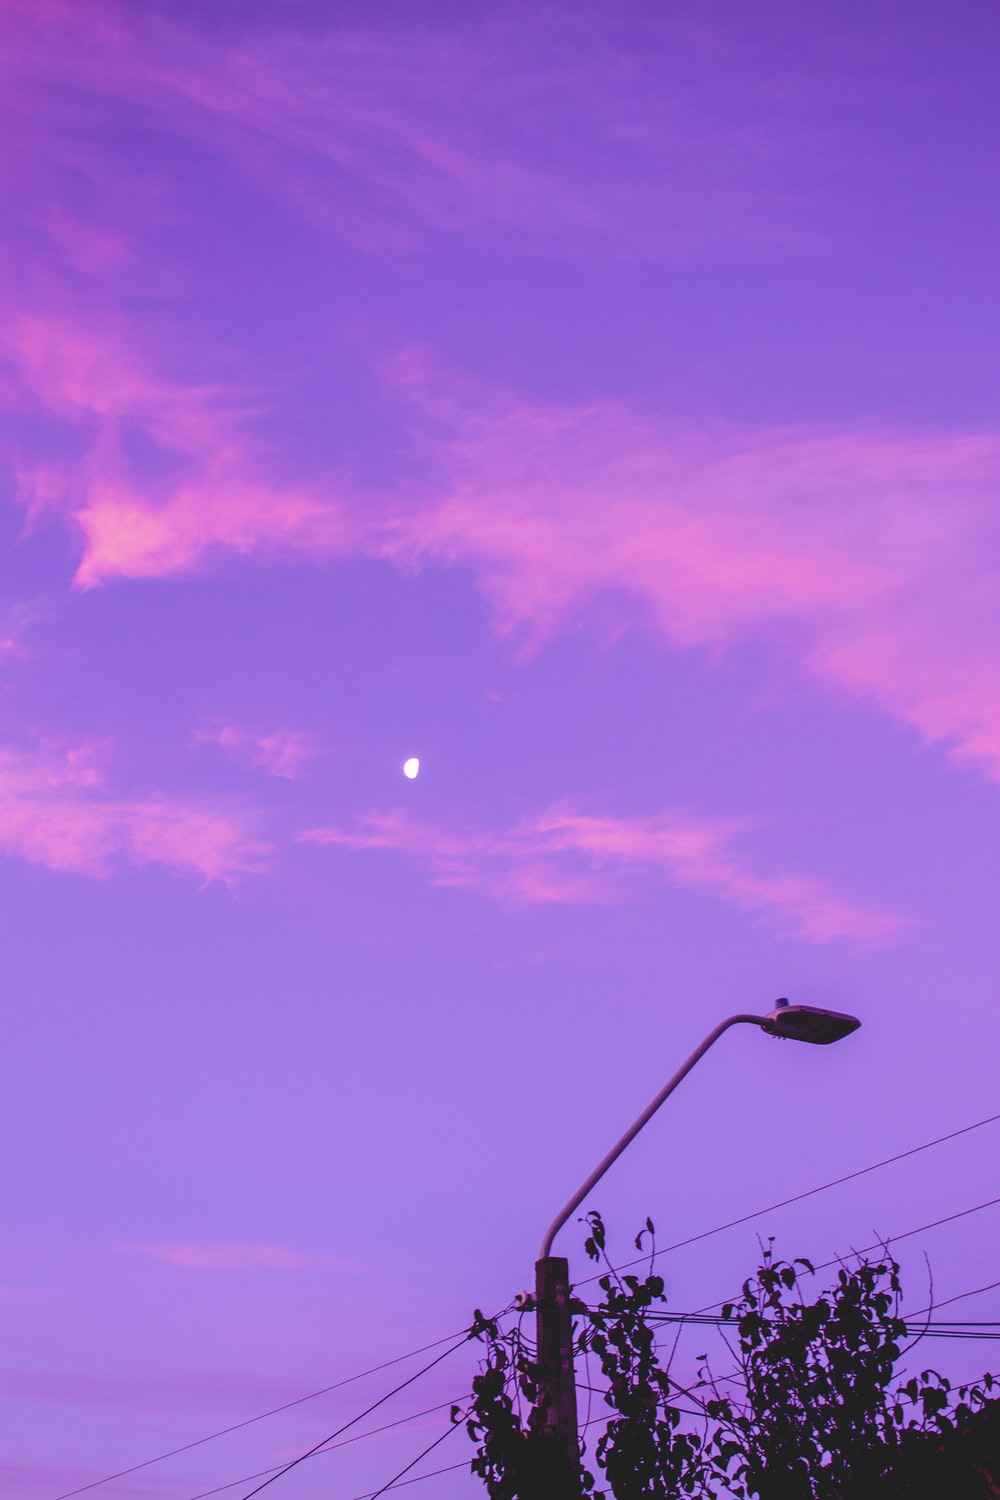 Aesthetic Sky Picture. Download Free Image